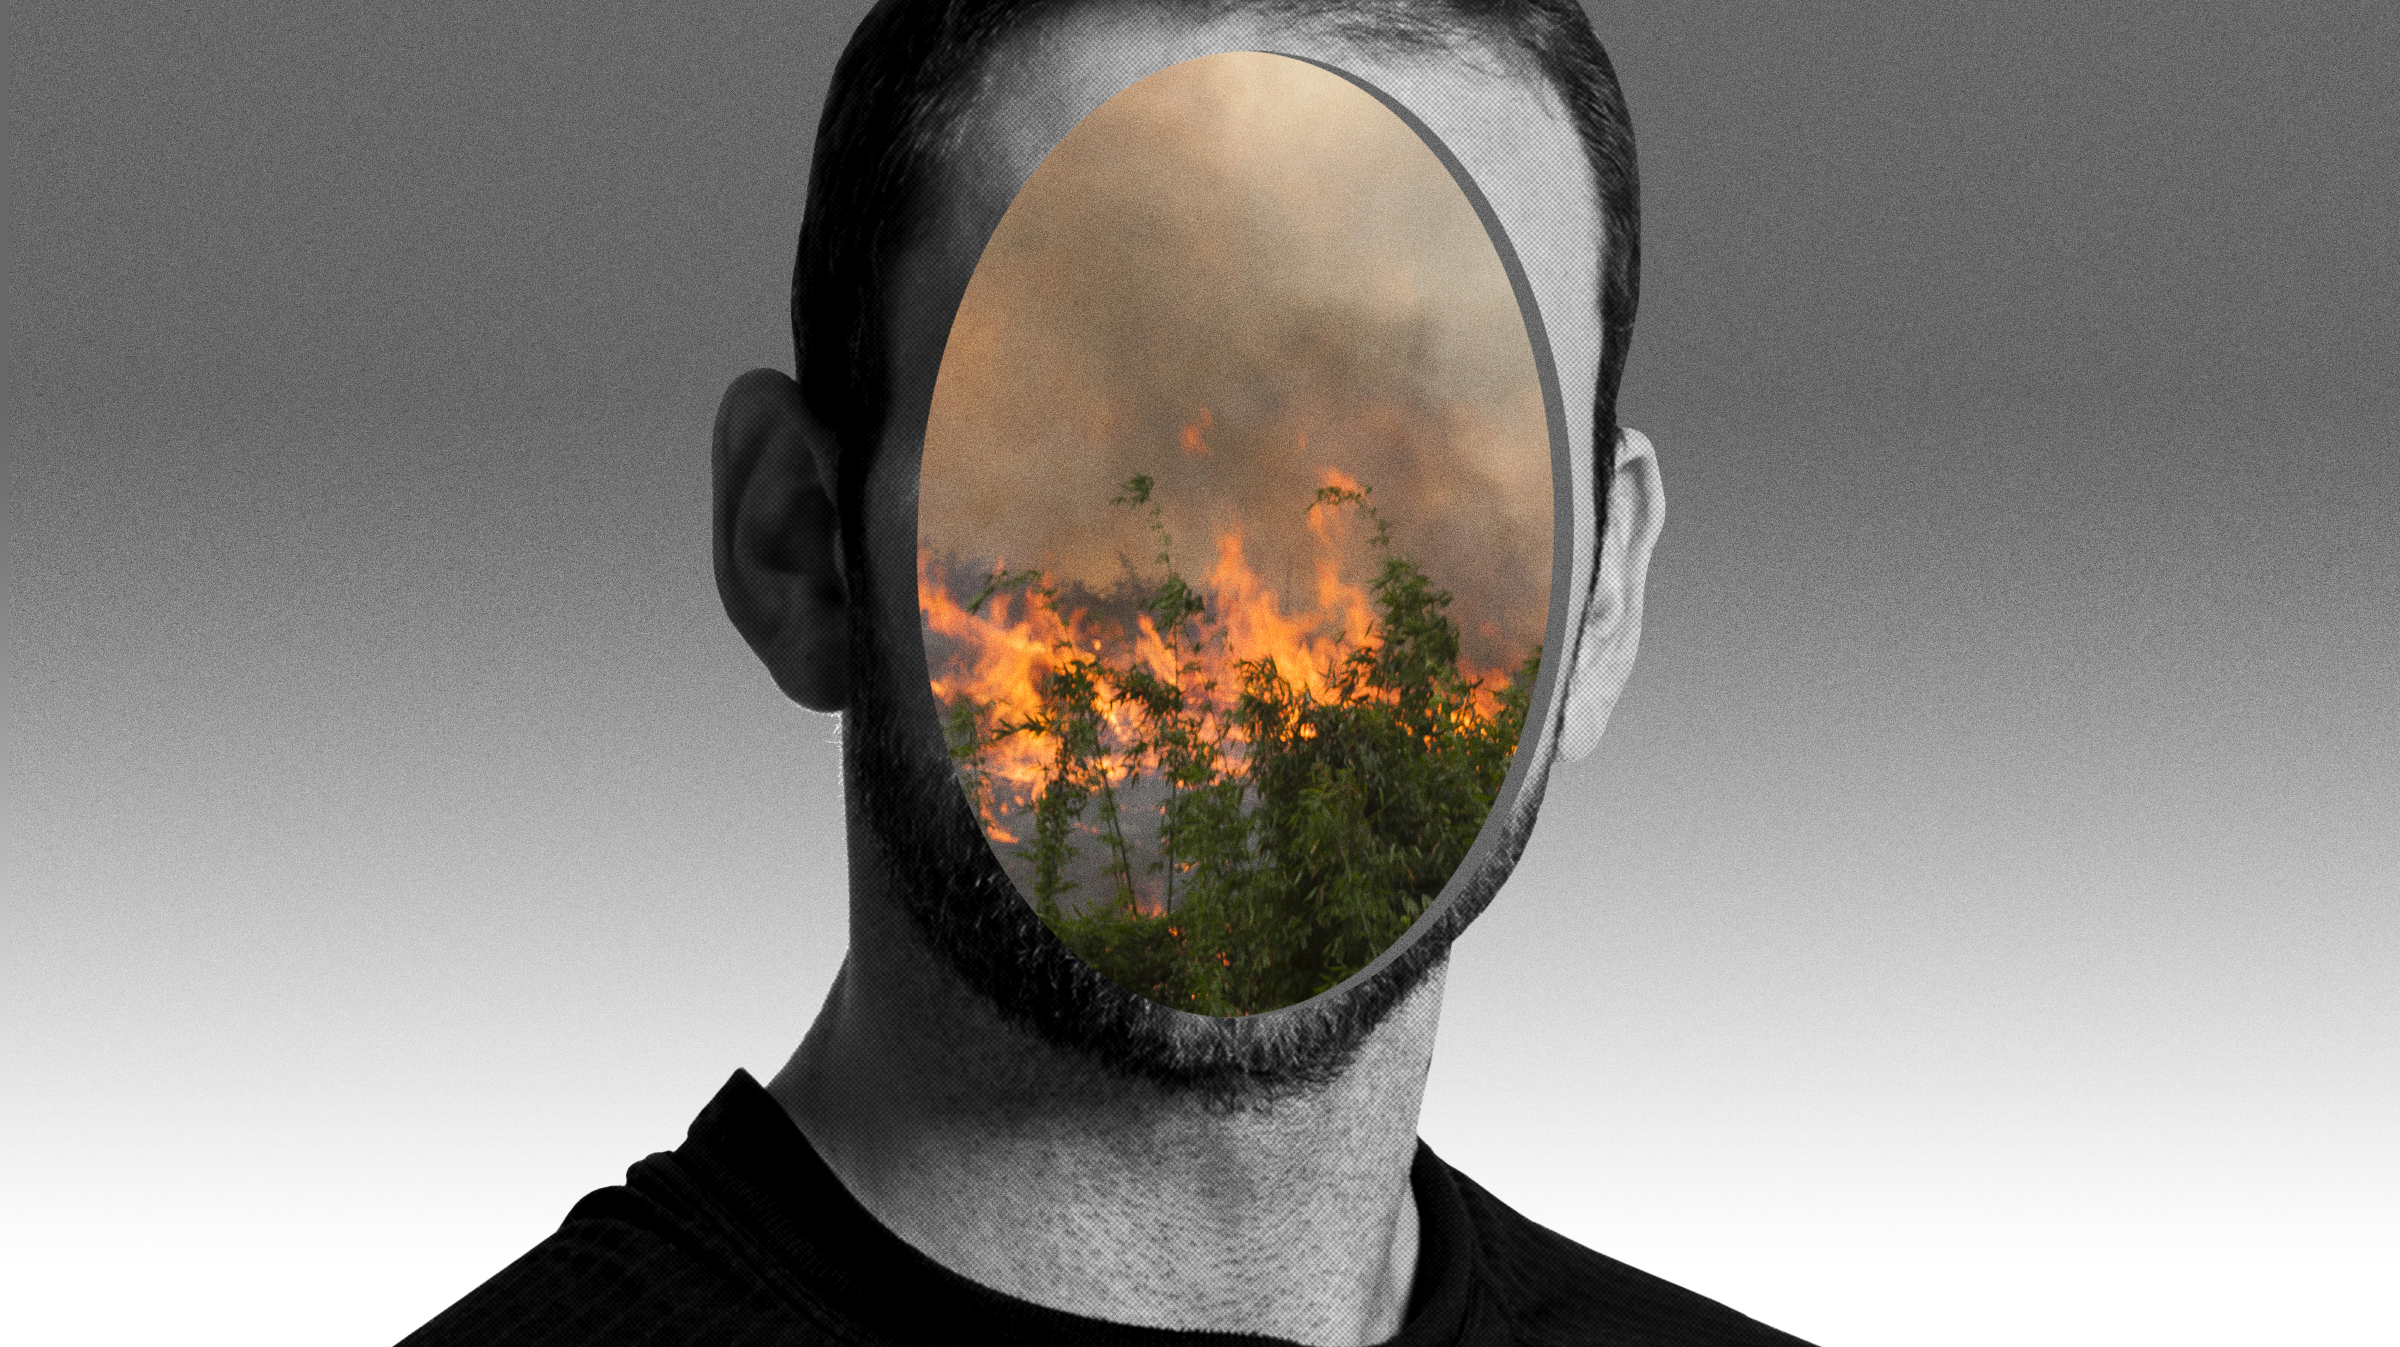 A collage where a man's face is replaced with a forest fire.